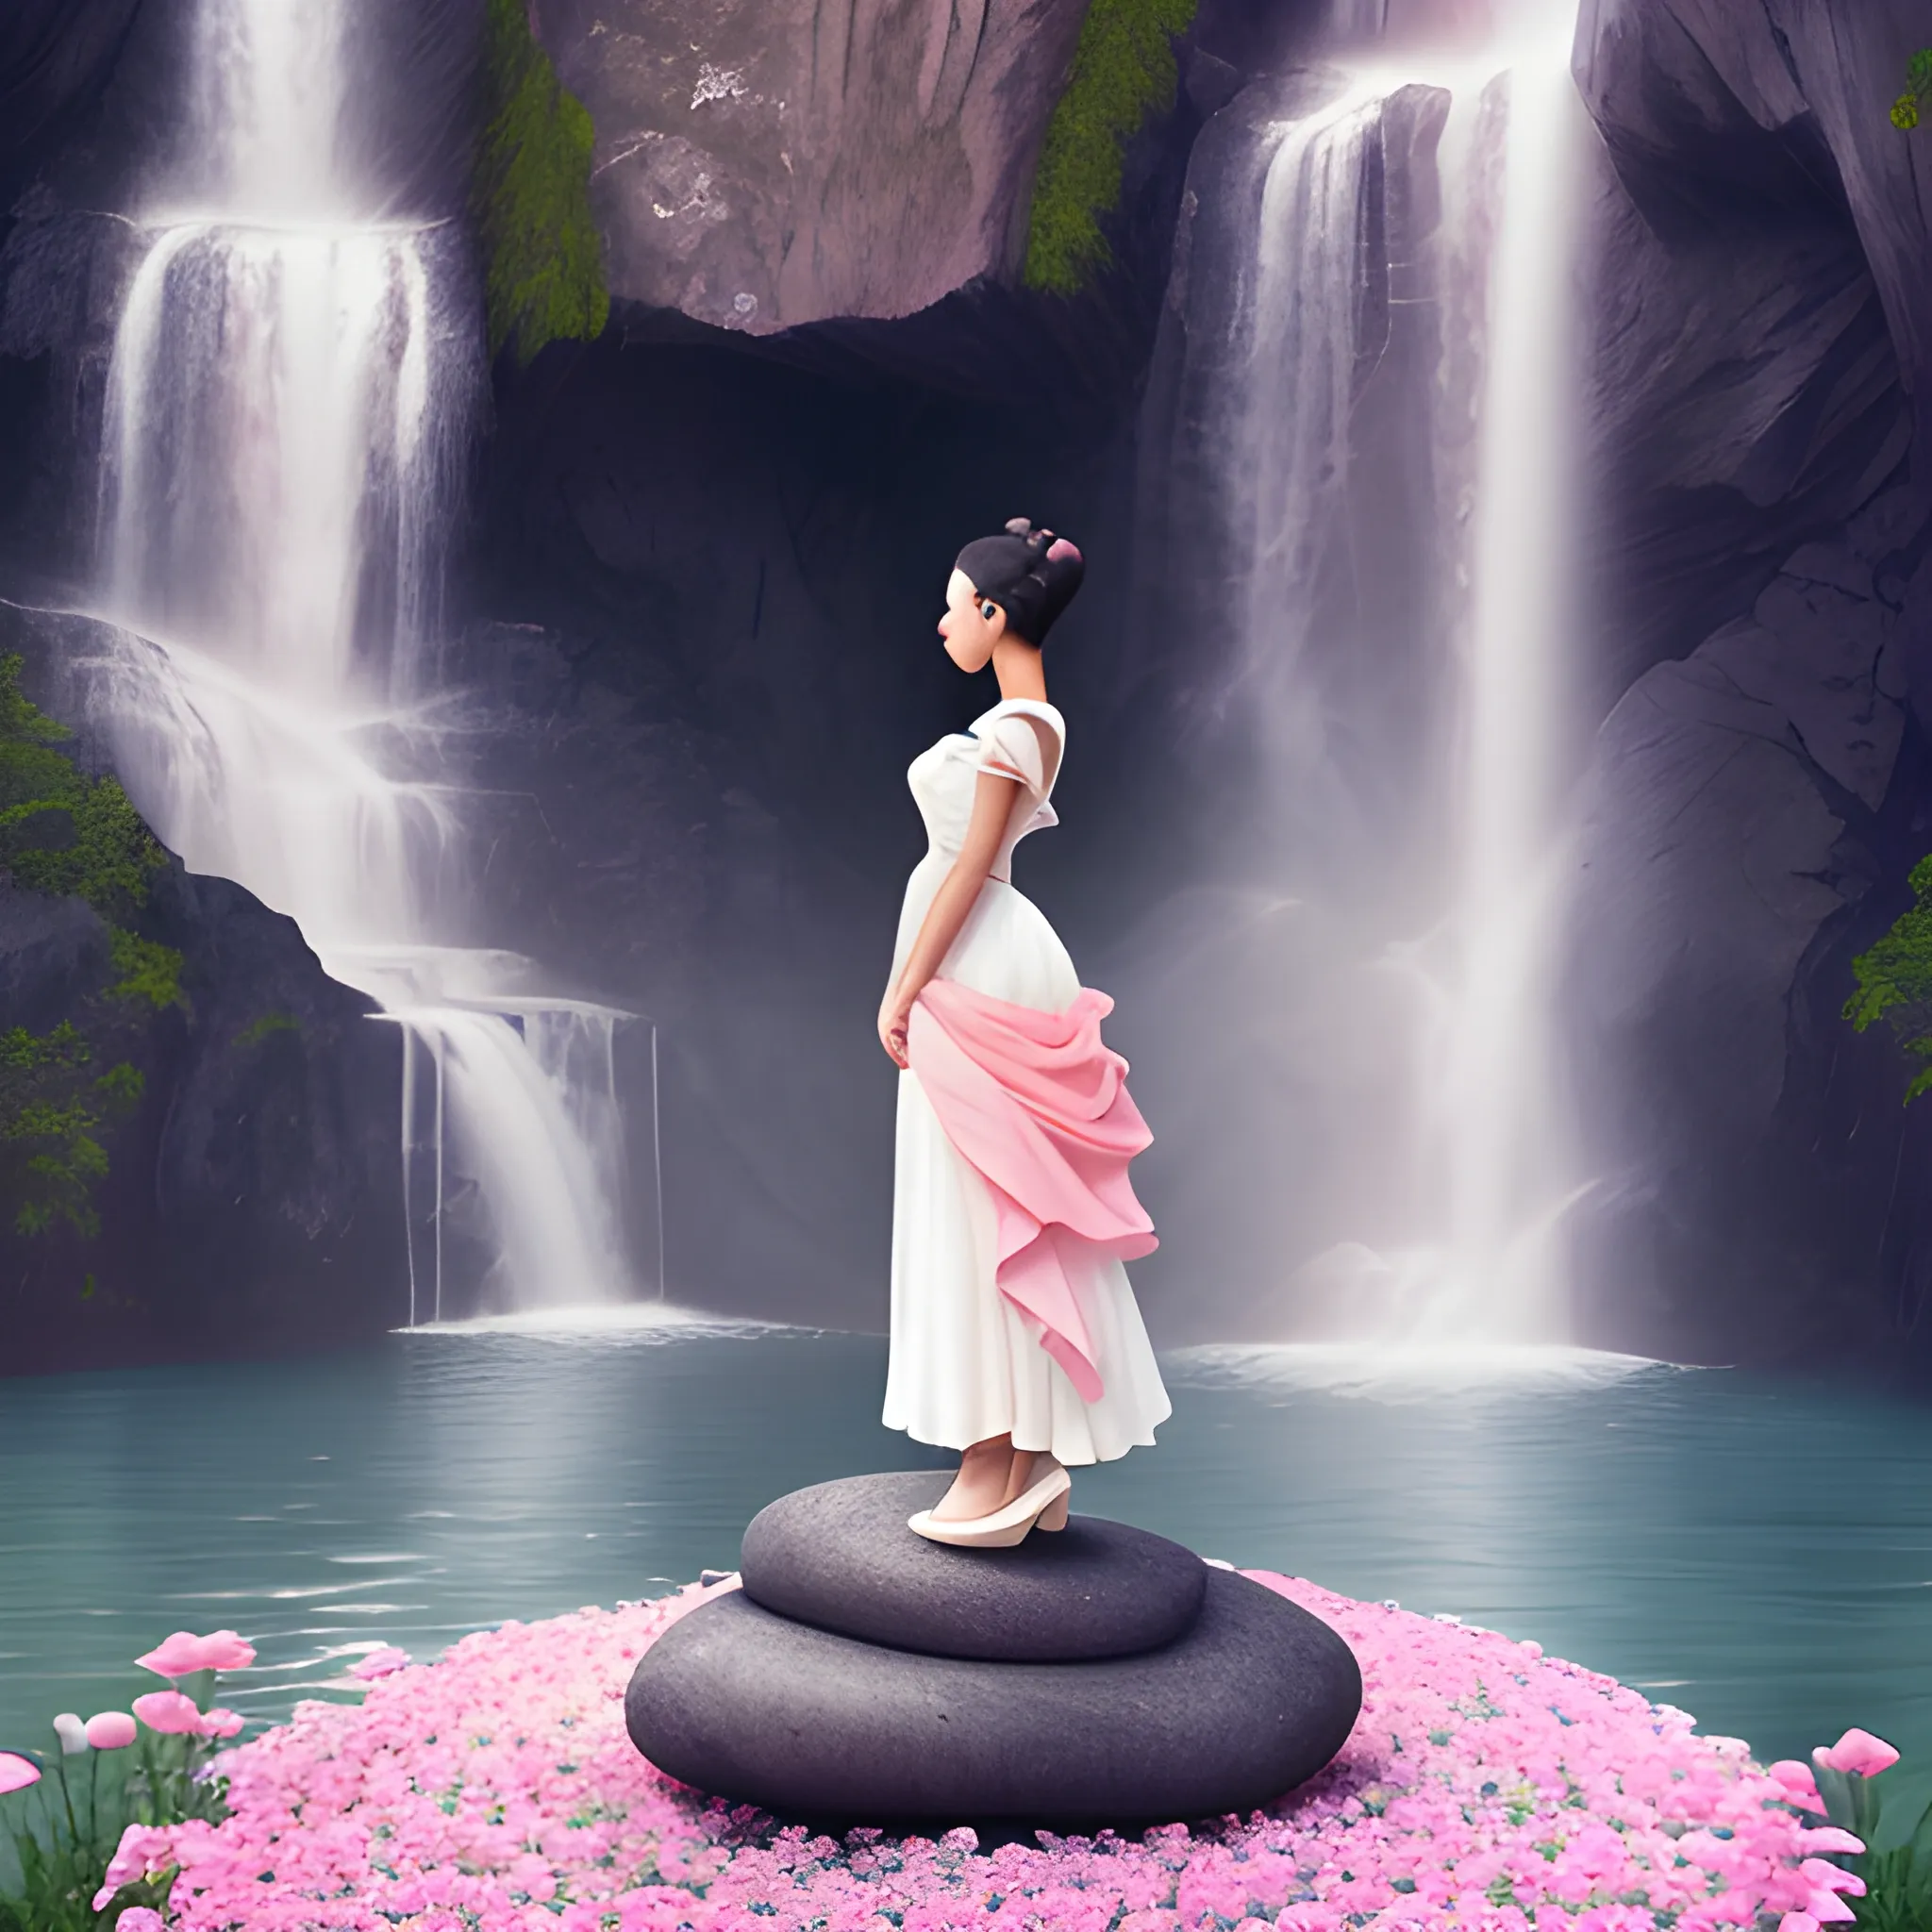 Very beautiful woman, black hair, bun hair, white dress, standing on stone, pink roses, light blue and pink, romanticism, high detail, 8K resolution, ultra high definition picture, waterfall background